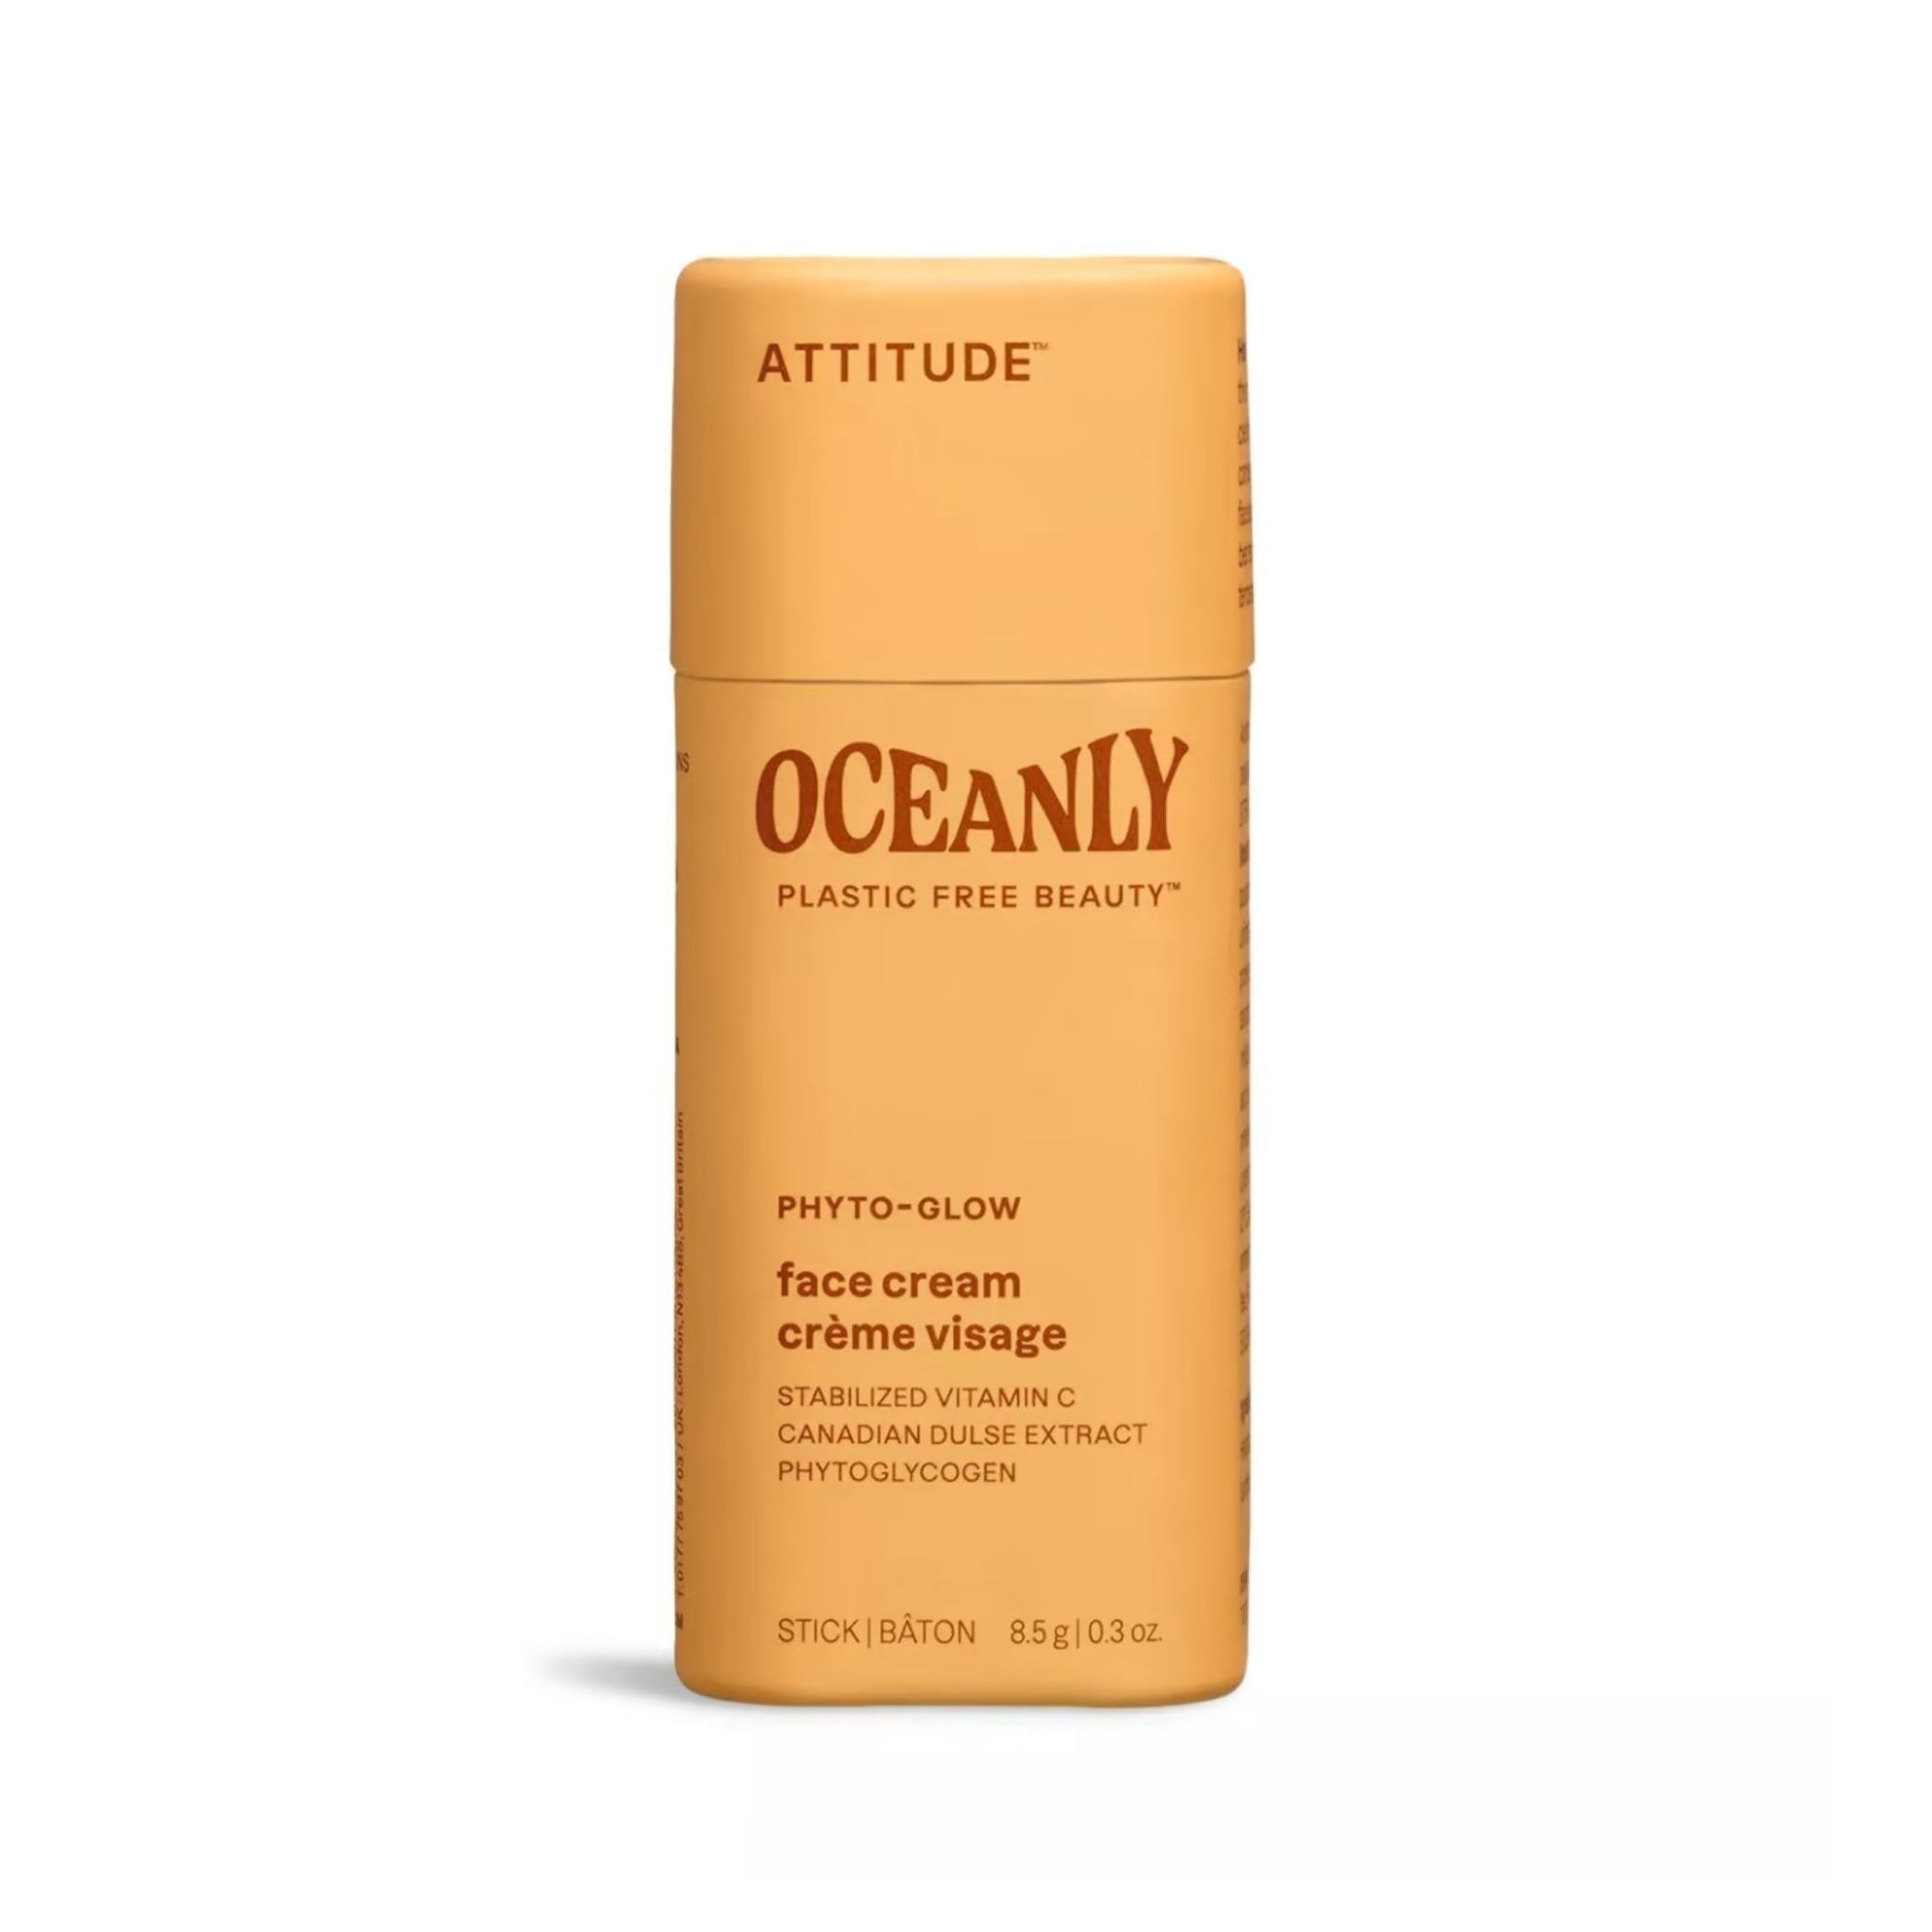 Attitude Oceanly Phyto-Glow Radiance Solid Face Cream with Vitamin C - 8.5g tube (smallest size). Stabilized vitamin C, Canadian dulse, phytoglycogen